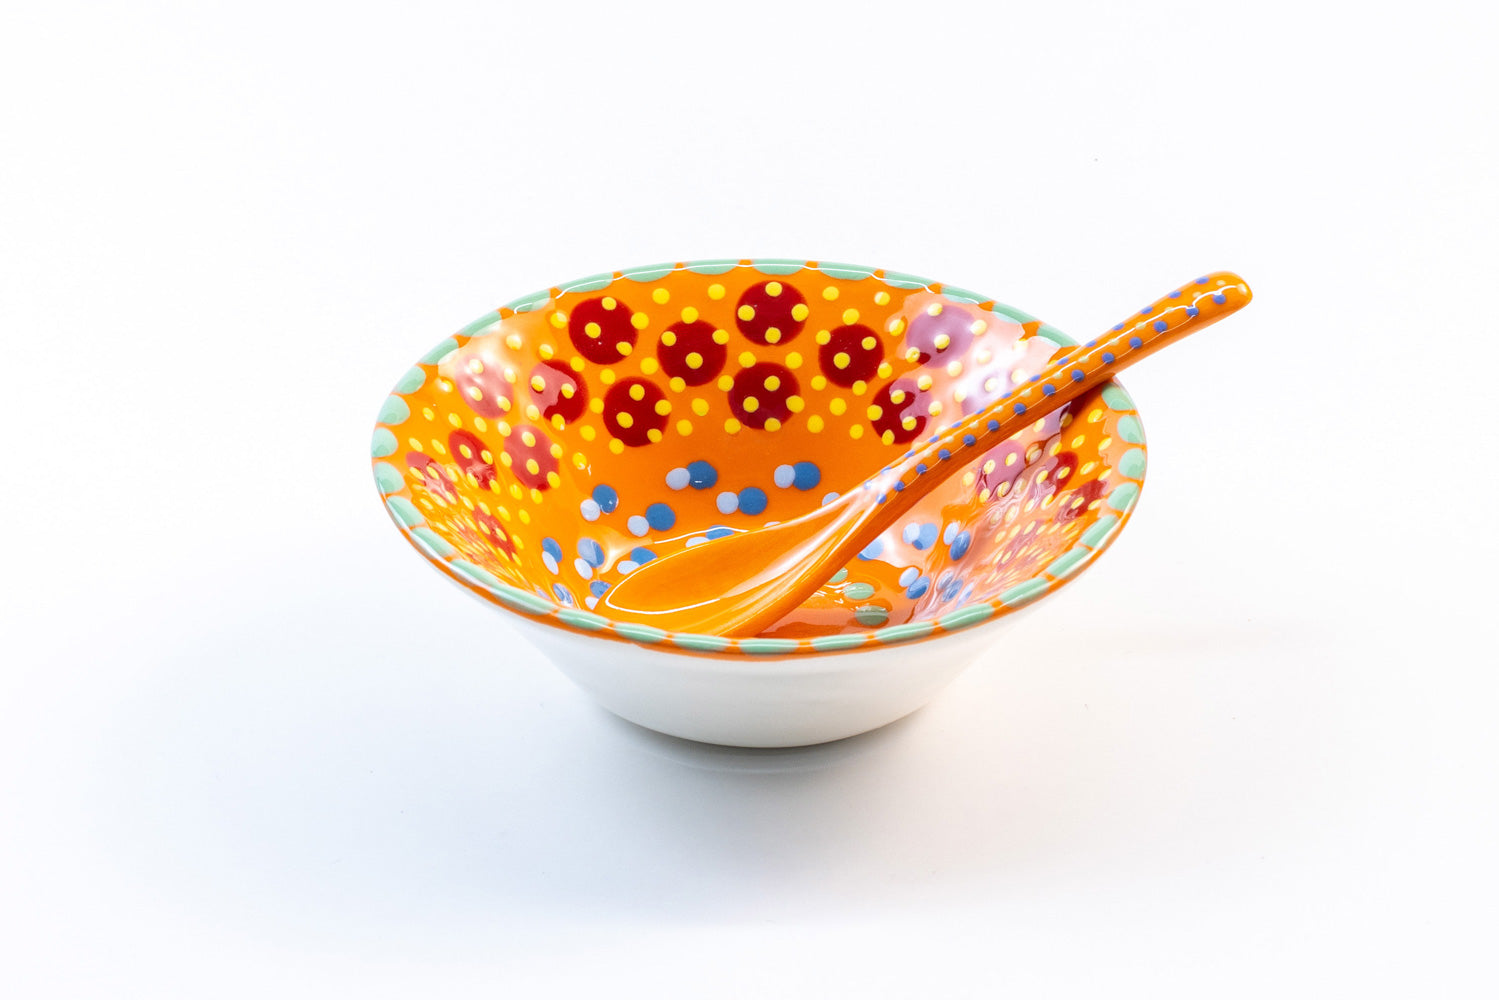 Orange ceramic mini nut bowl with matching ceramic small spoon in orange. Dots & Stripes on top of base color in turquoise, red, yellow and green. Perfect pair!